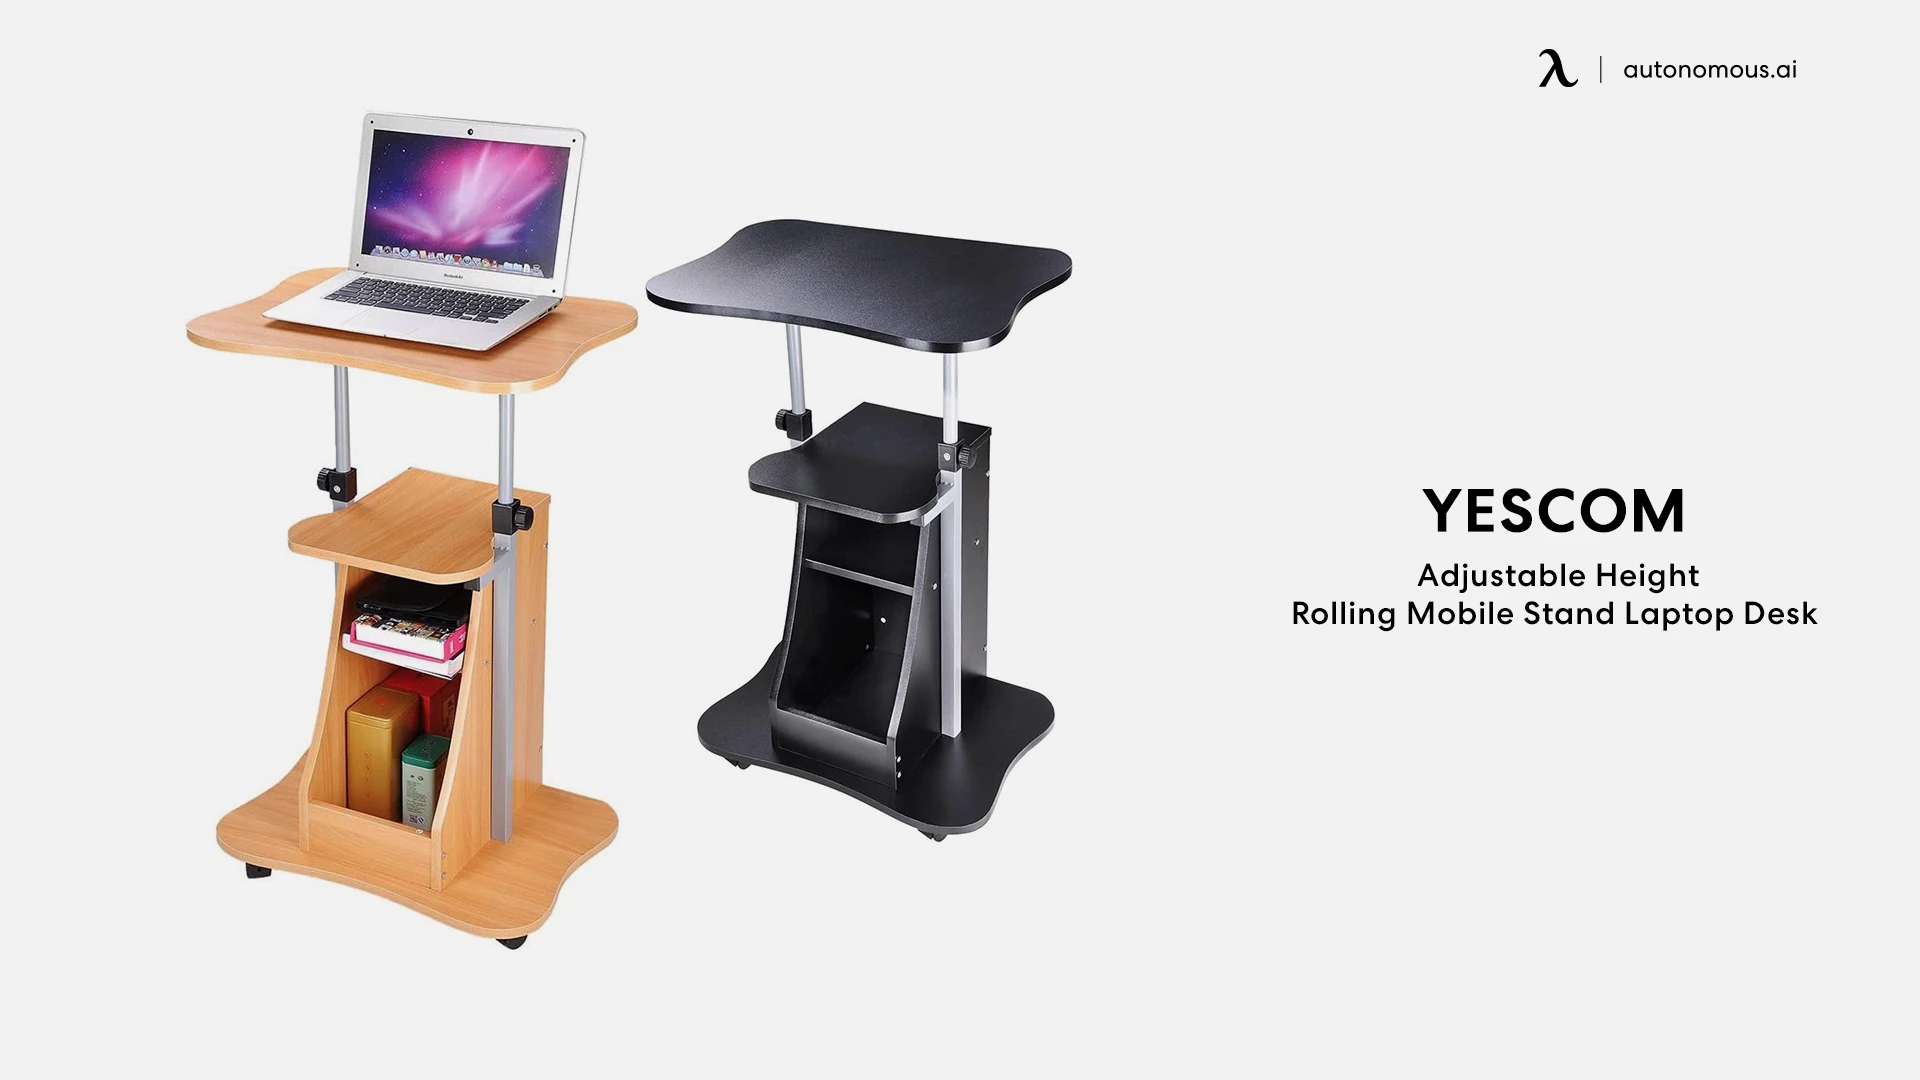 Yescom Adjustable Height Rolling Mobile Stand Laptop Desk